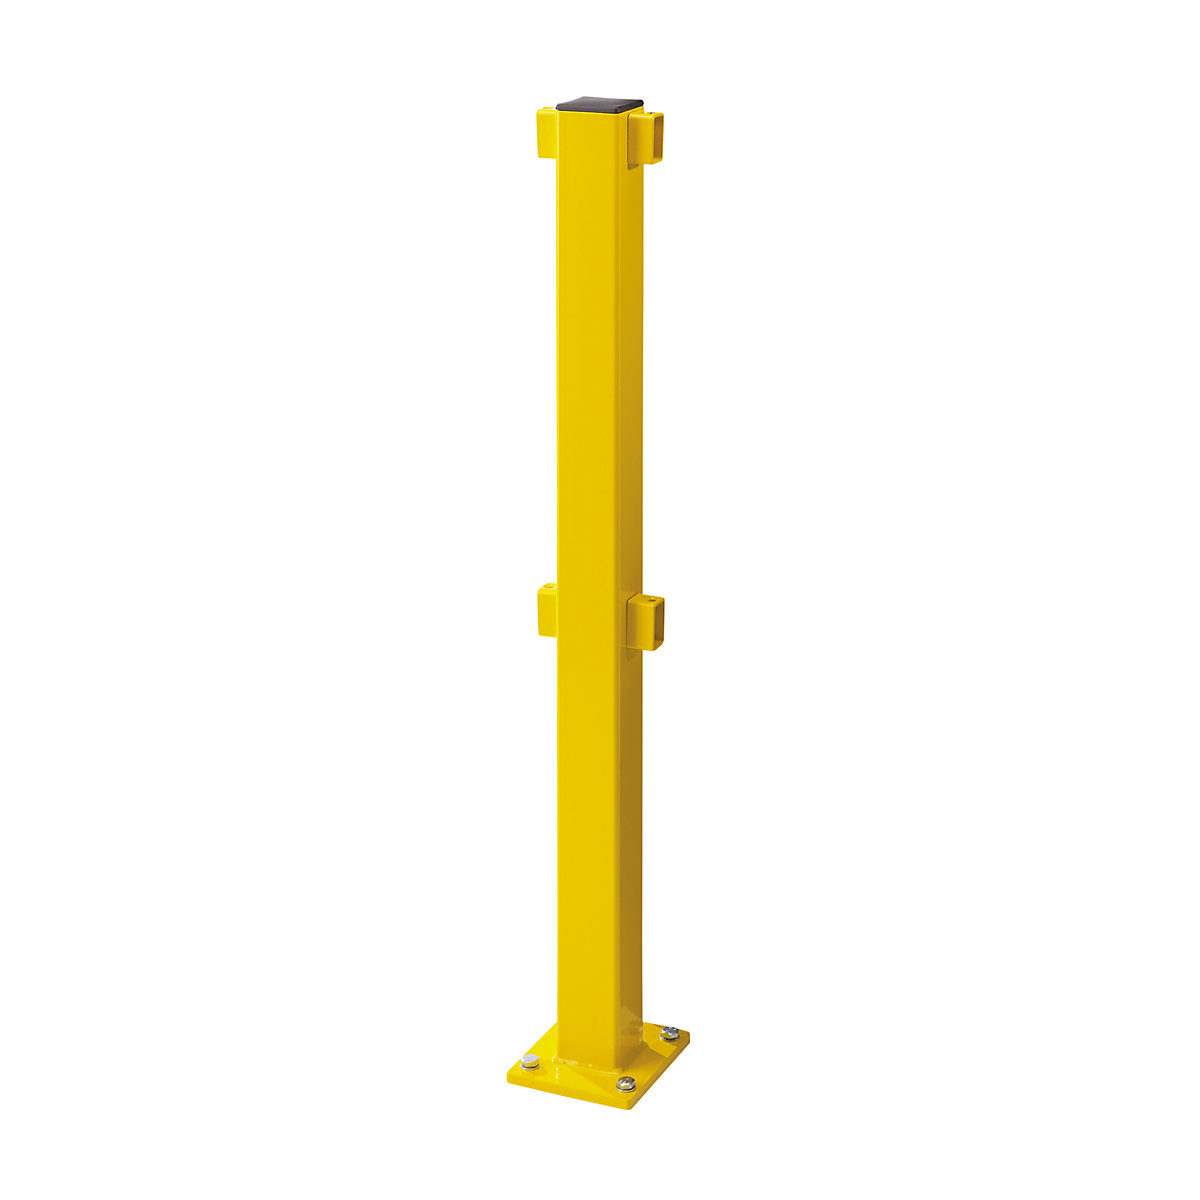 S-Line post for safety railing, for indoor areas, centre post-3